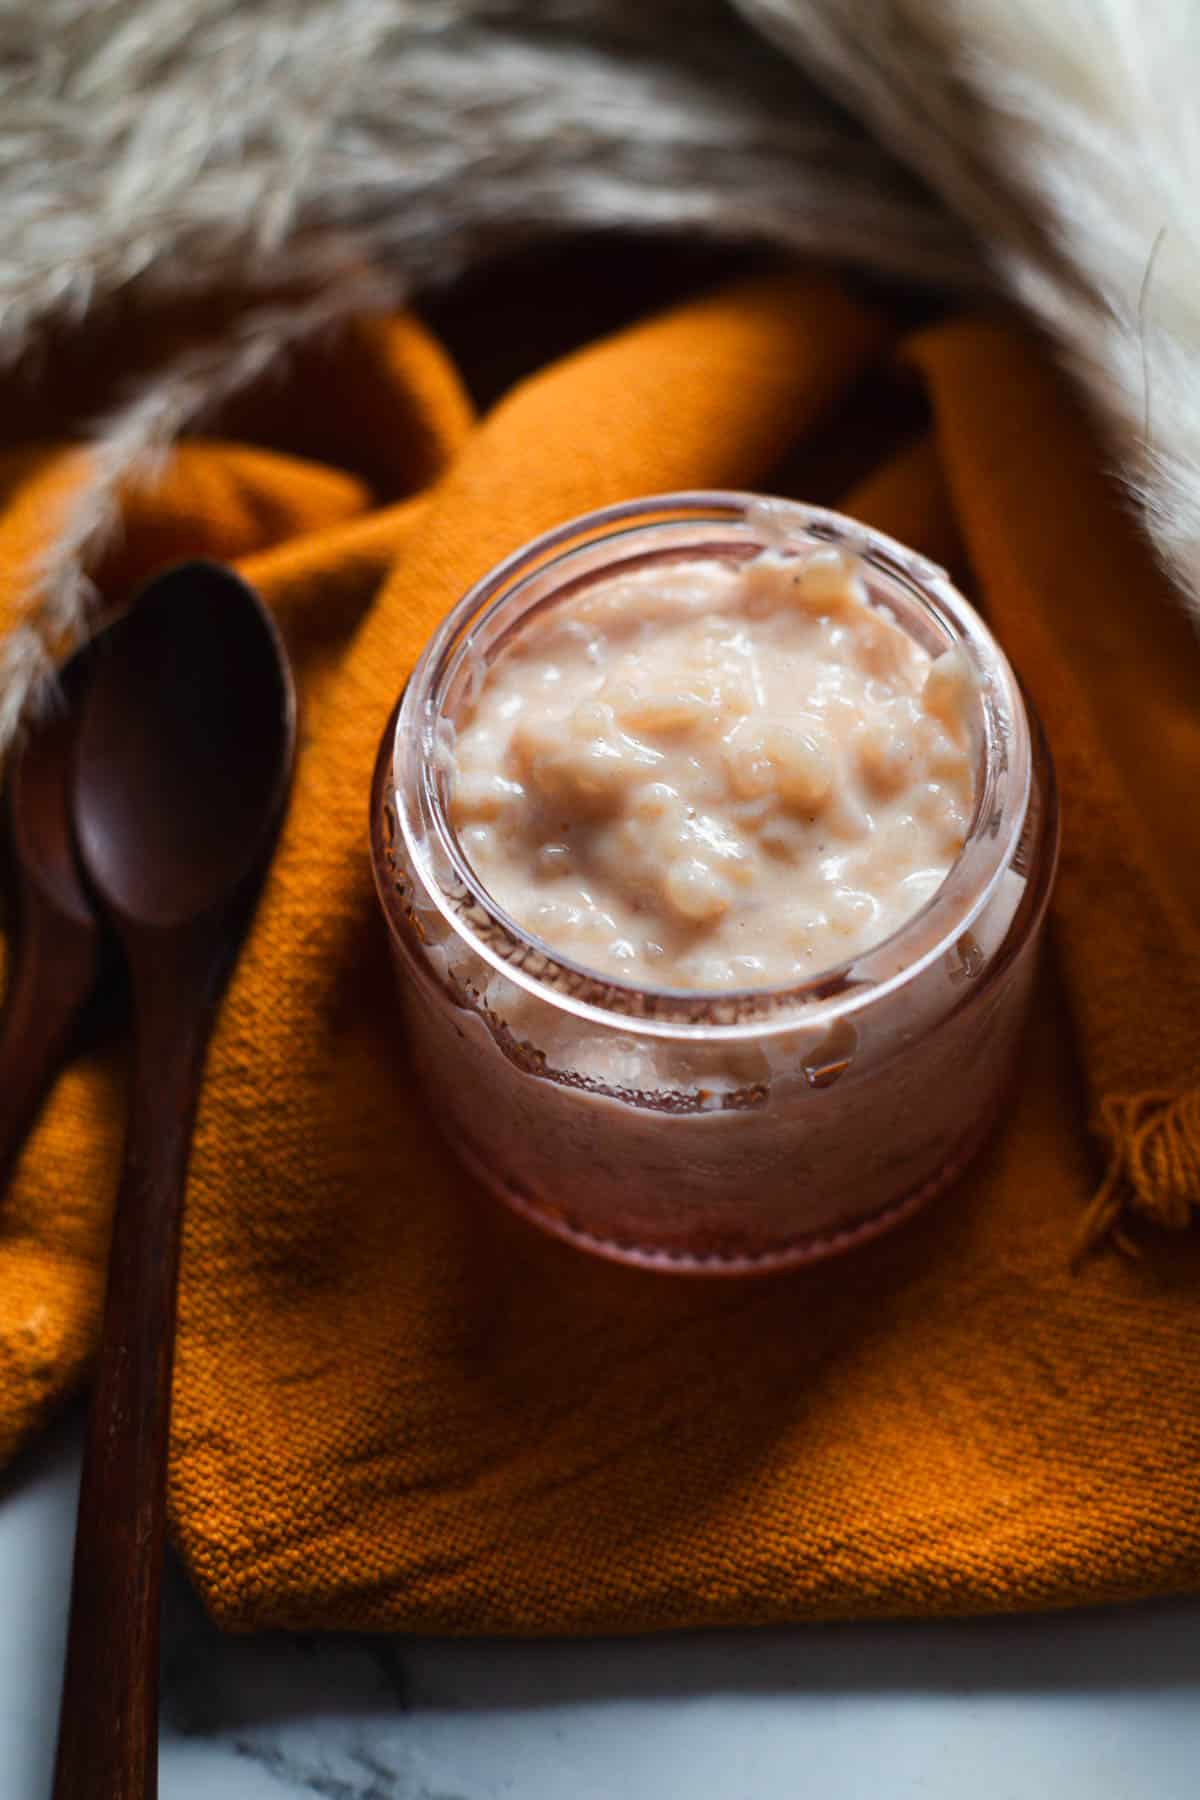 Colombian rice pudding with spoon